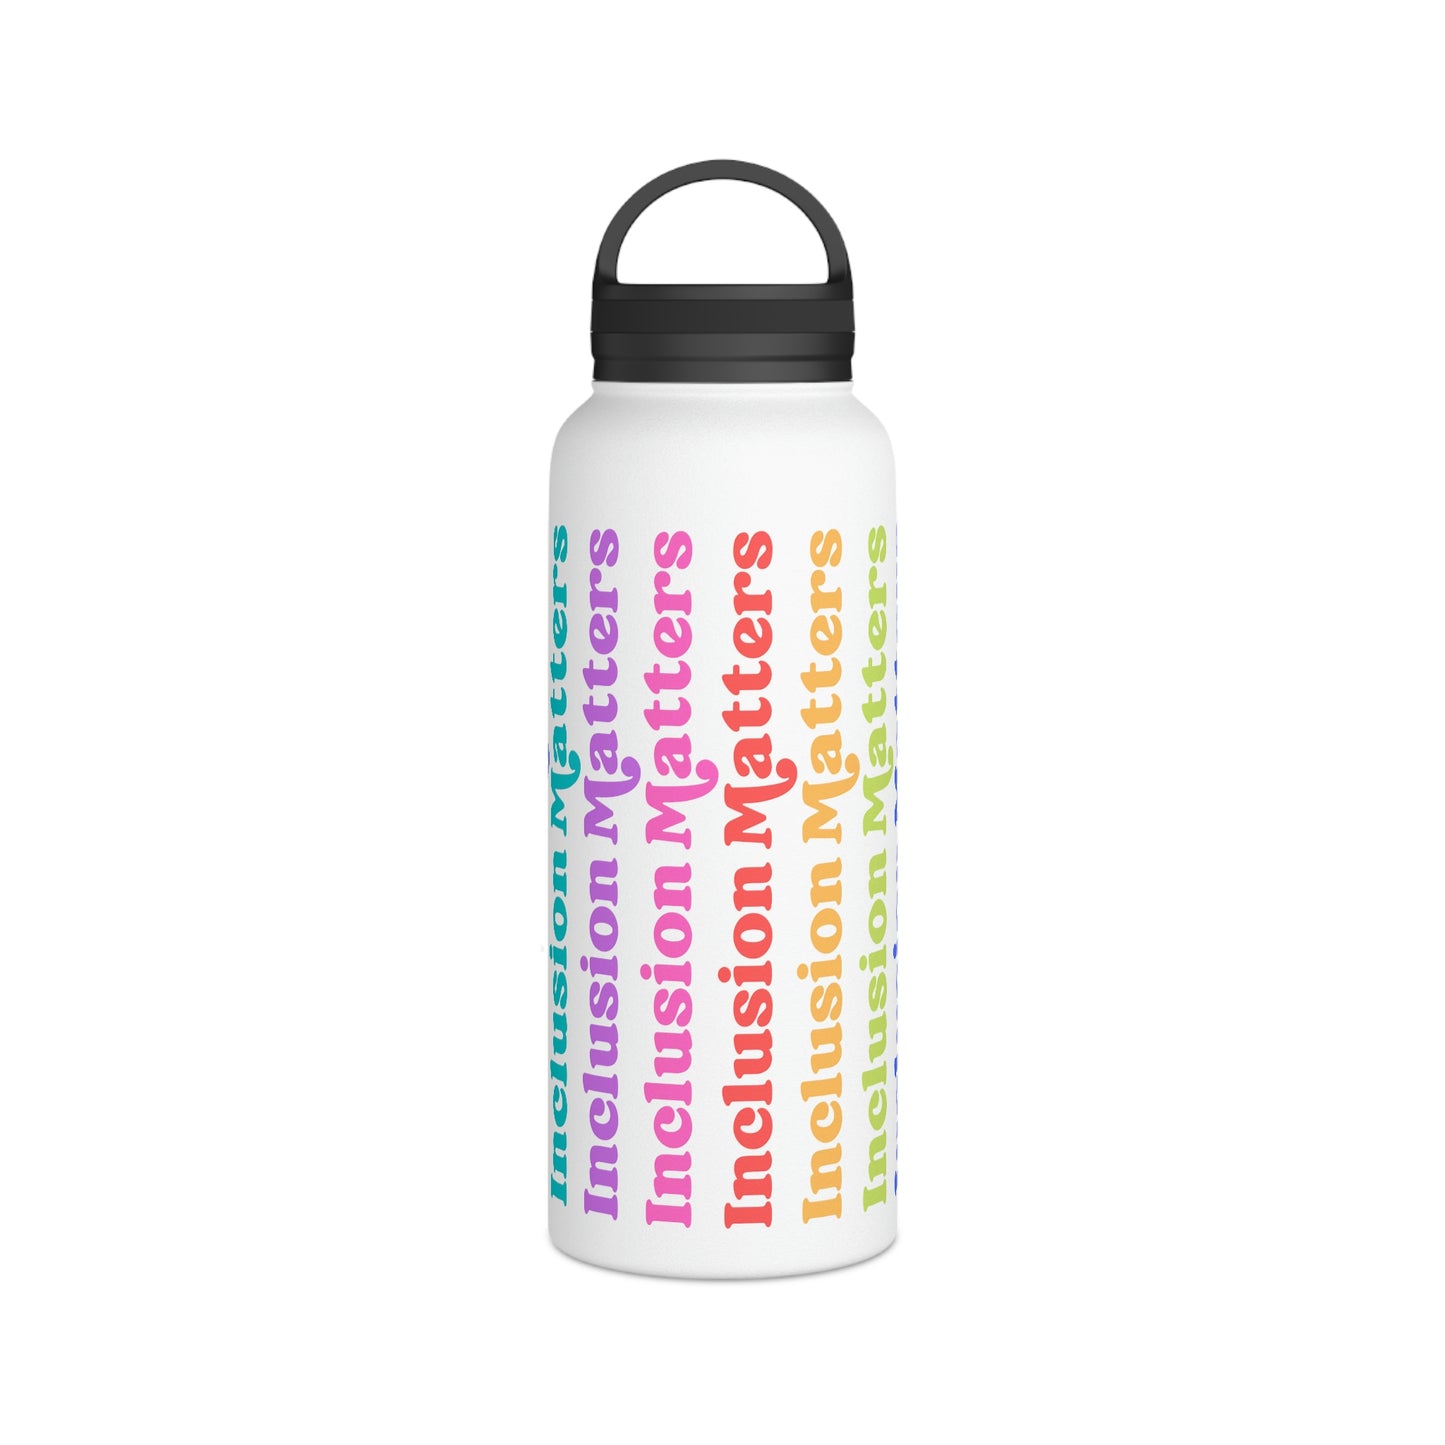 Inclusion Matters Water Bottle 32oz